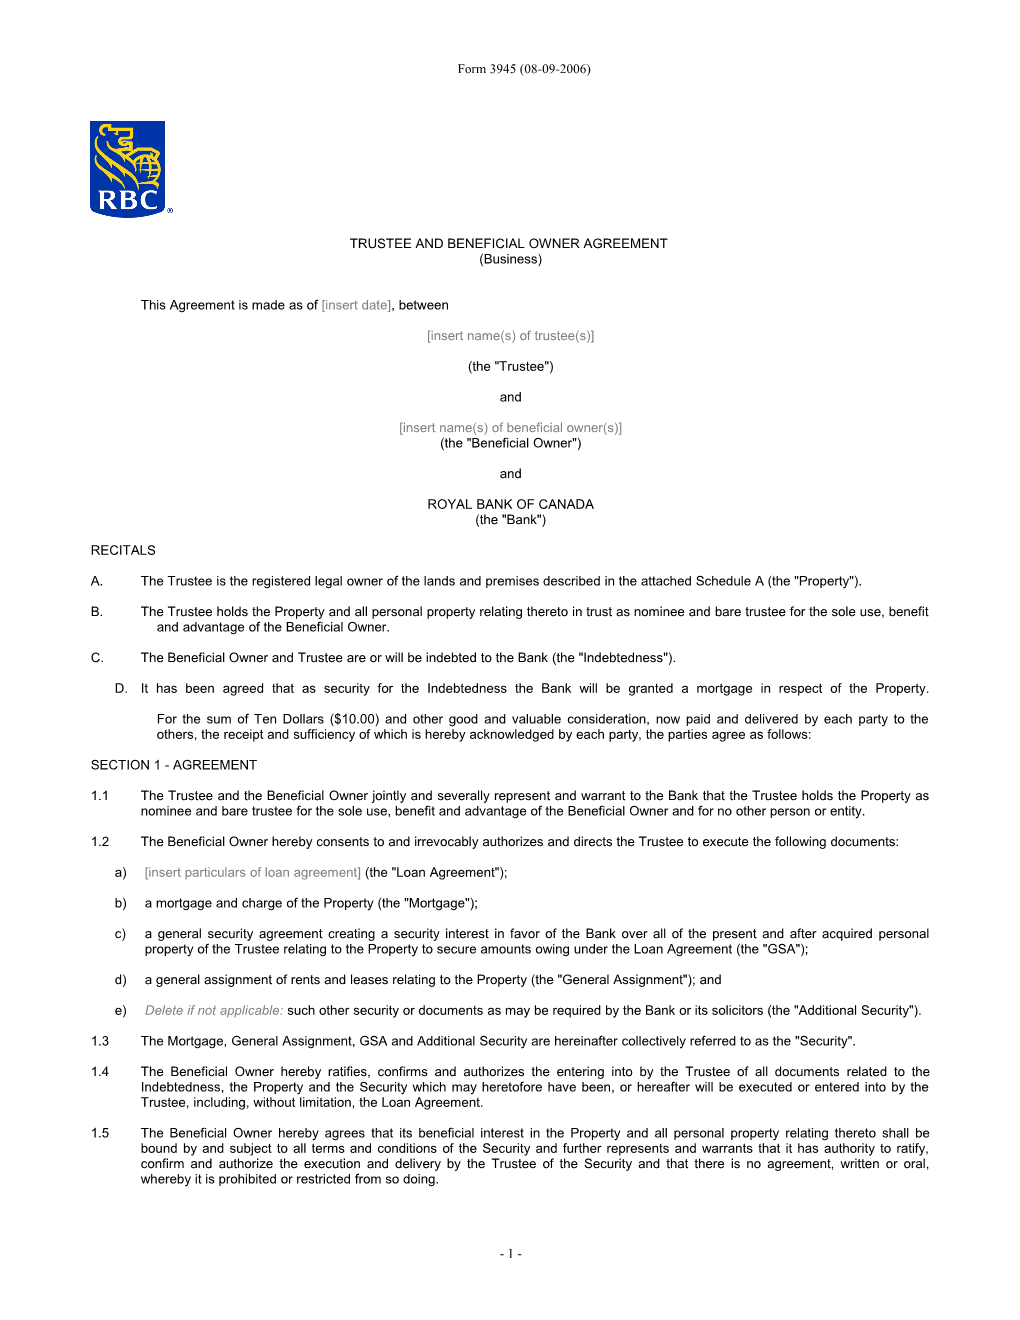 Trustee and Beneficial Owner Agreement s2